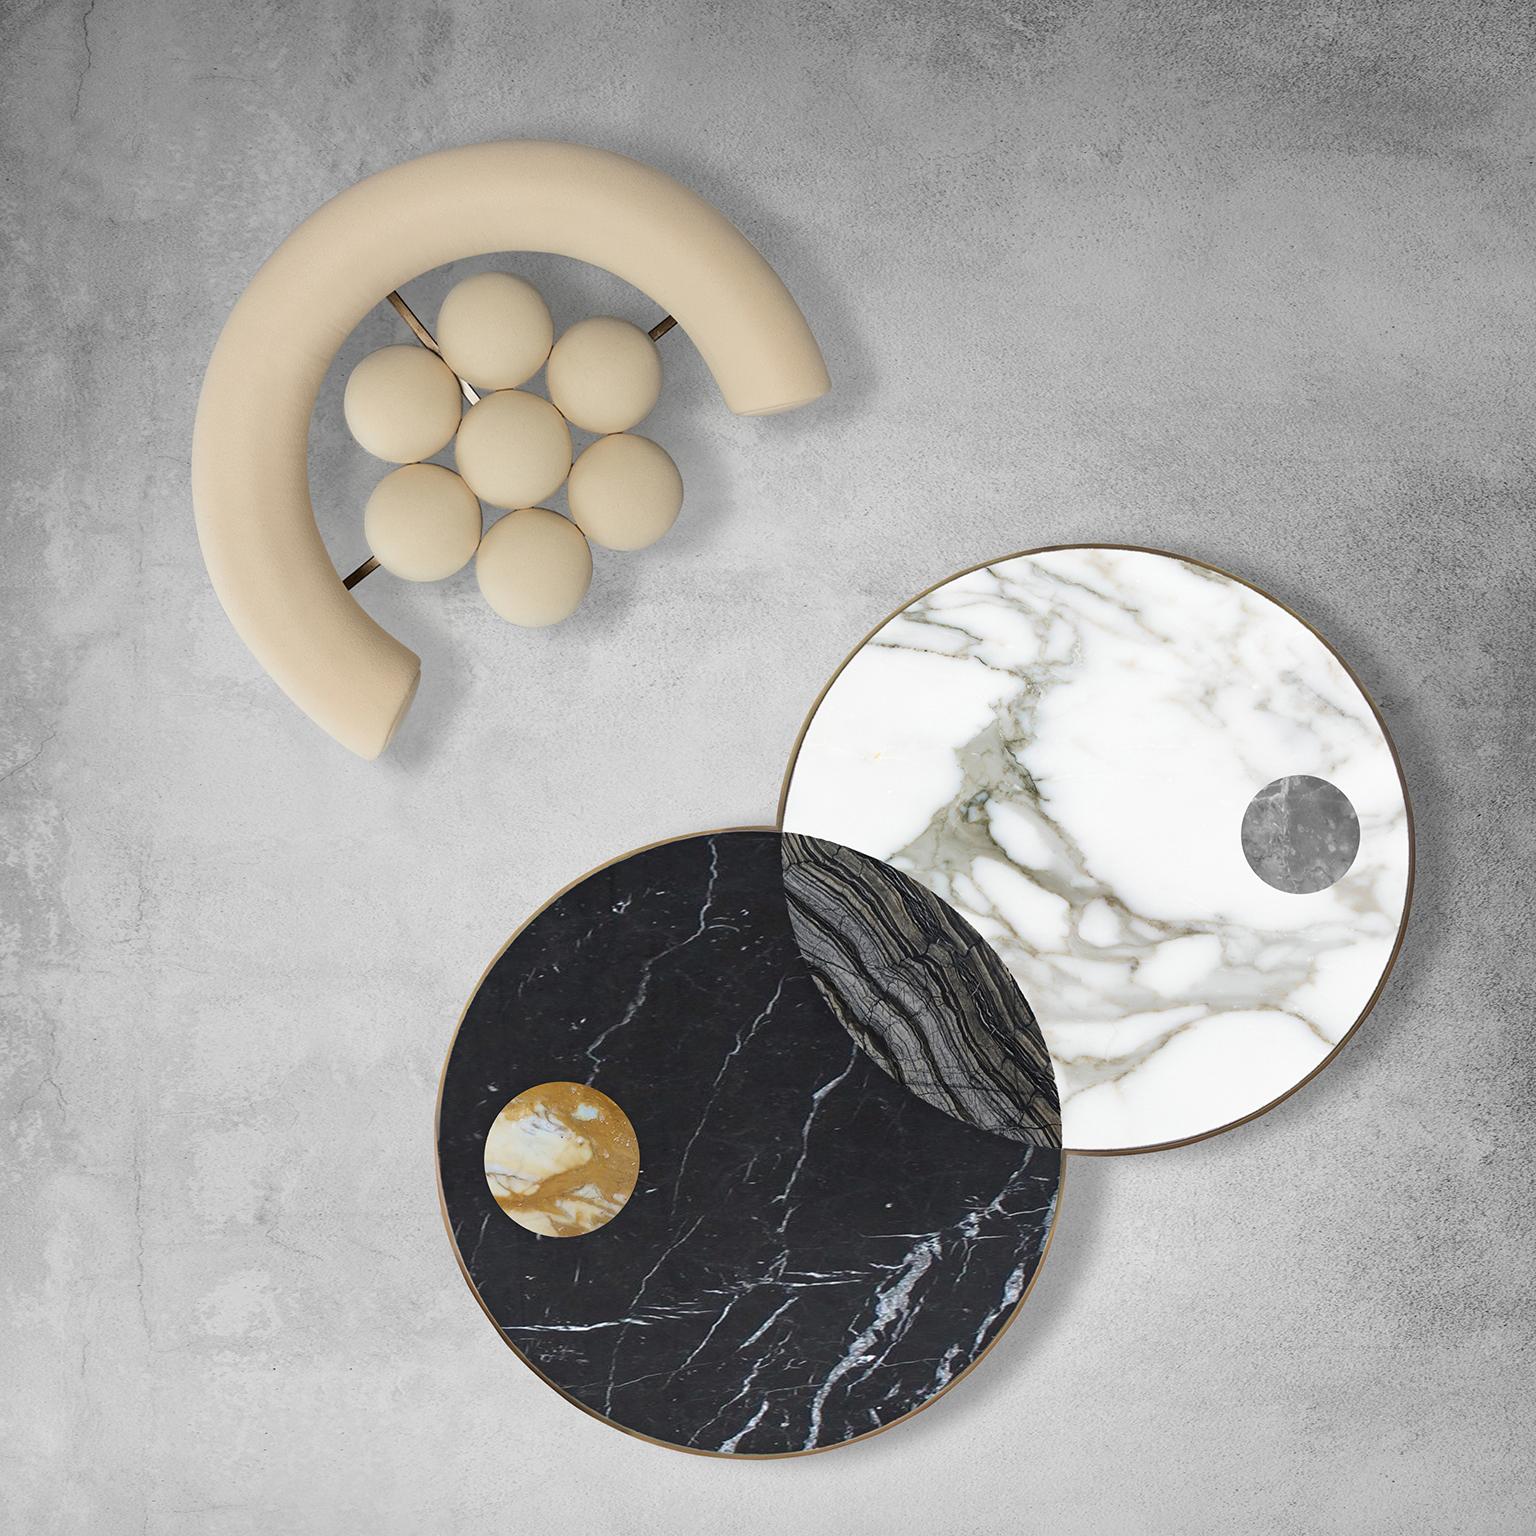 Sun and moon coffee table by Bohinc Studio. From the Lunar collection, this table has discs echoing planetary forms that are bisected and overlaid to create surface patterns and structural elements. These form dynamically-poised bases and marble